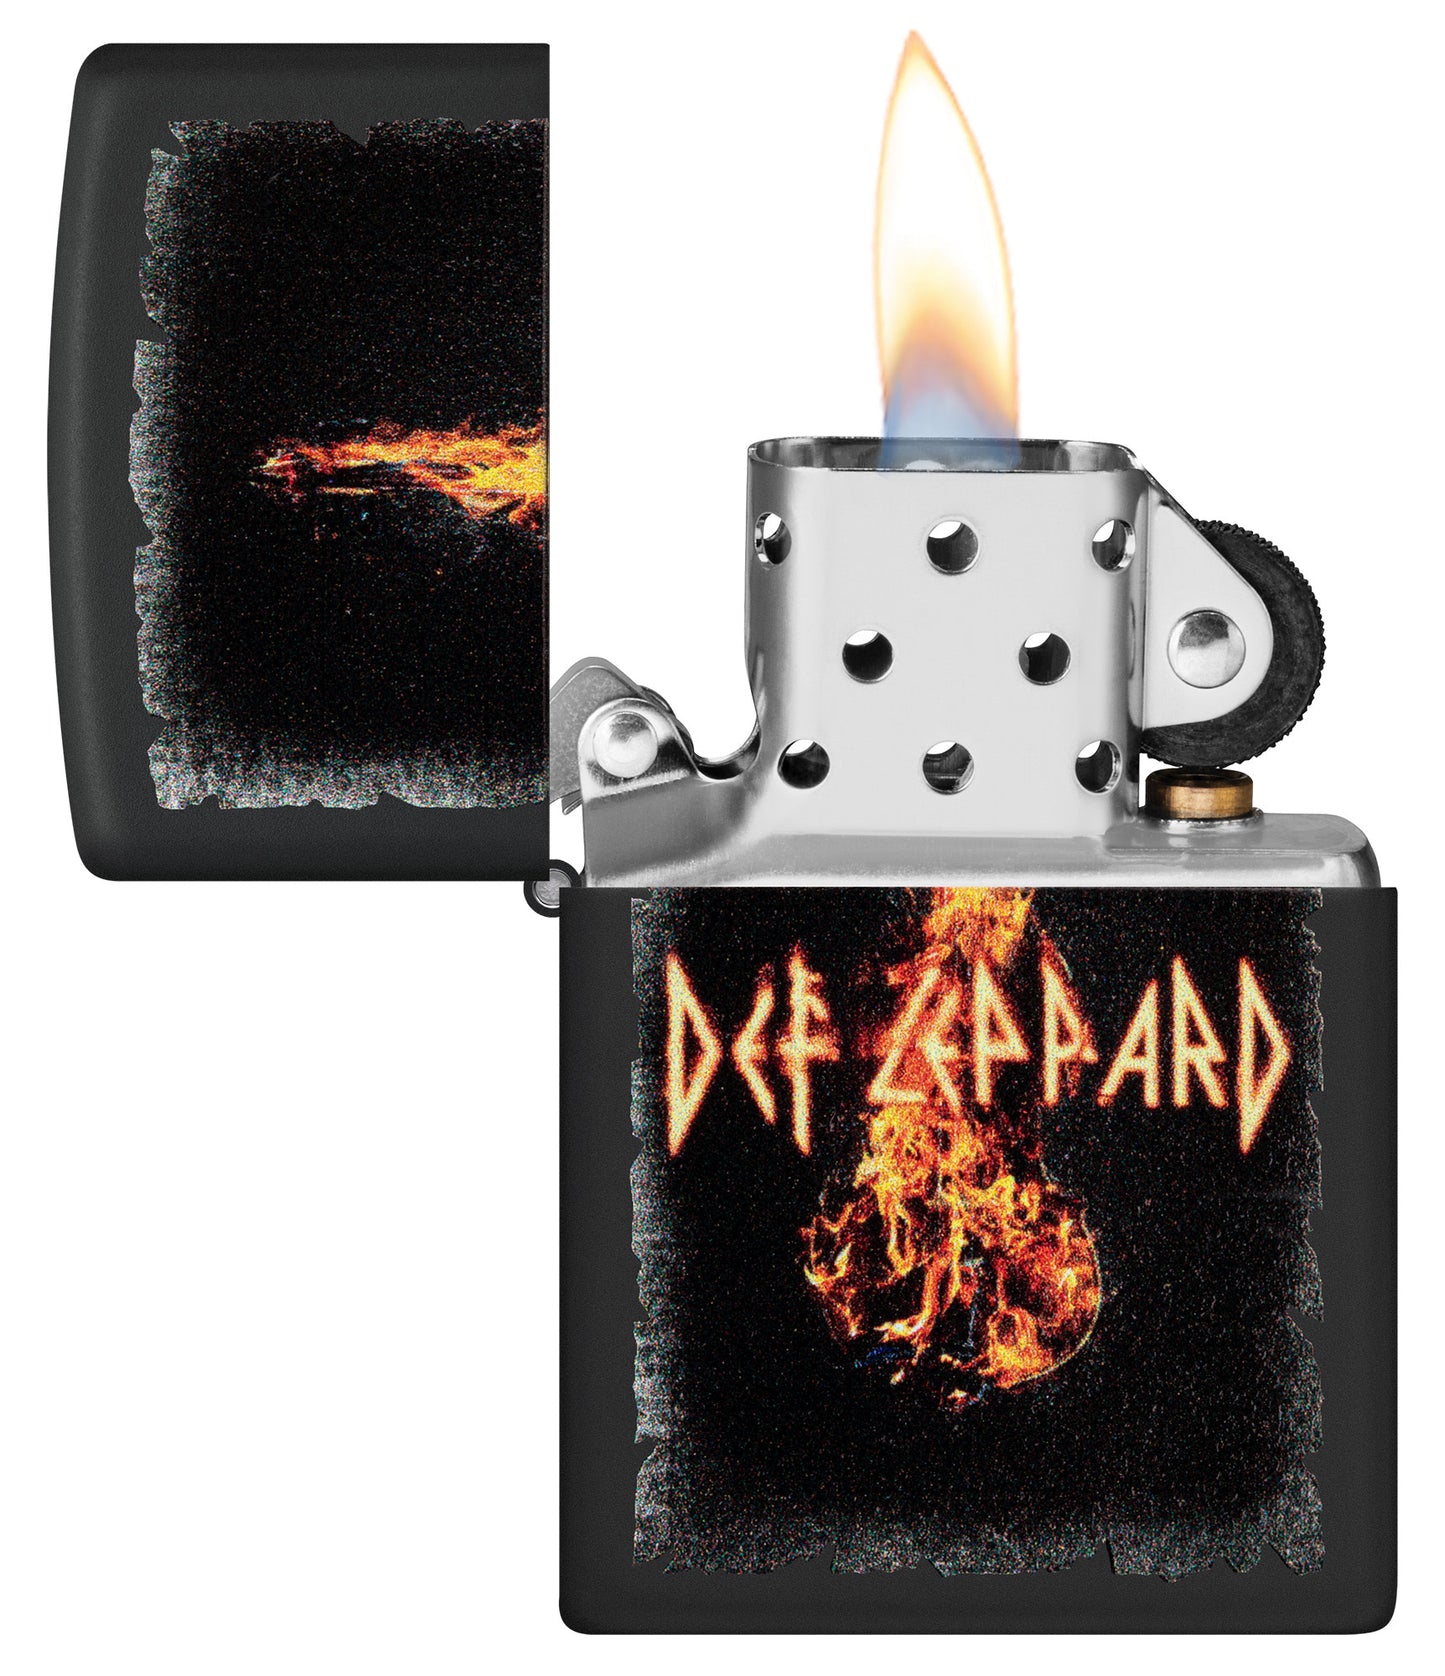 Zippo Def Leppard Burning Violin Black Matte Windproof Lighter with its lid open and lit.